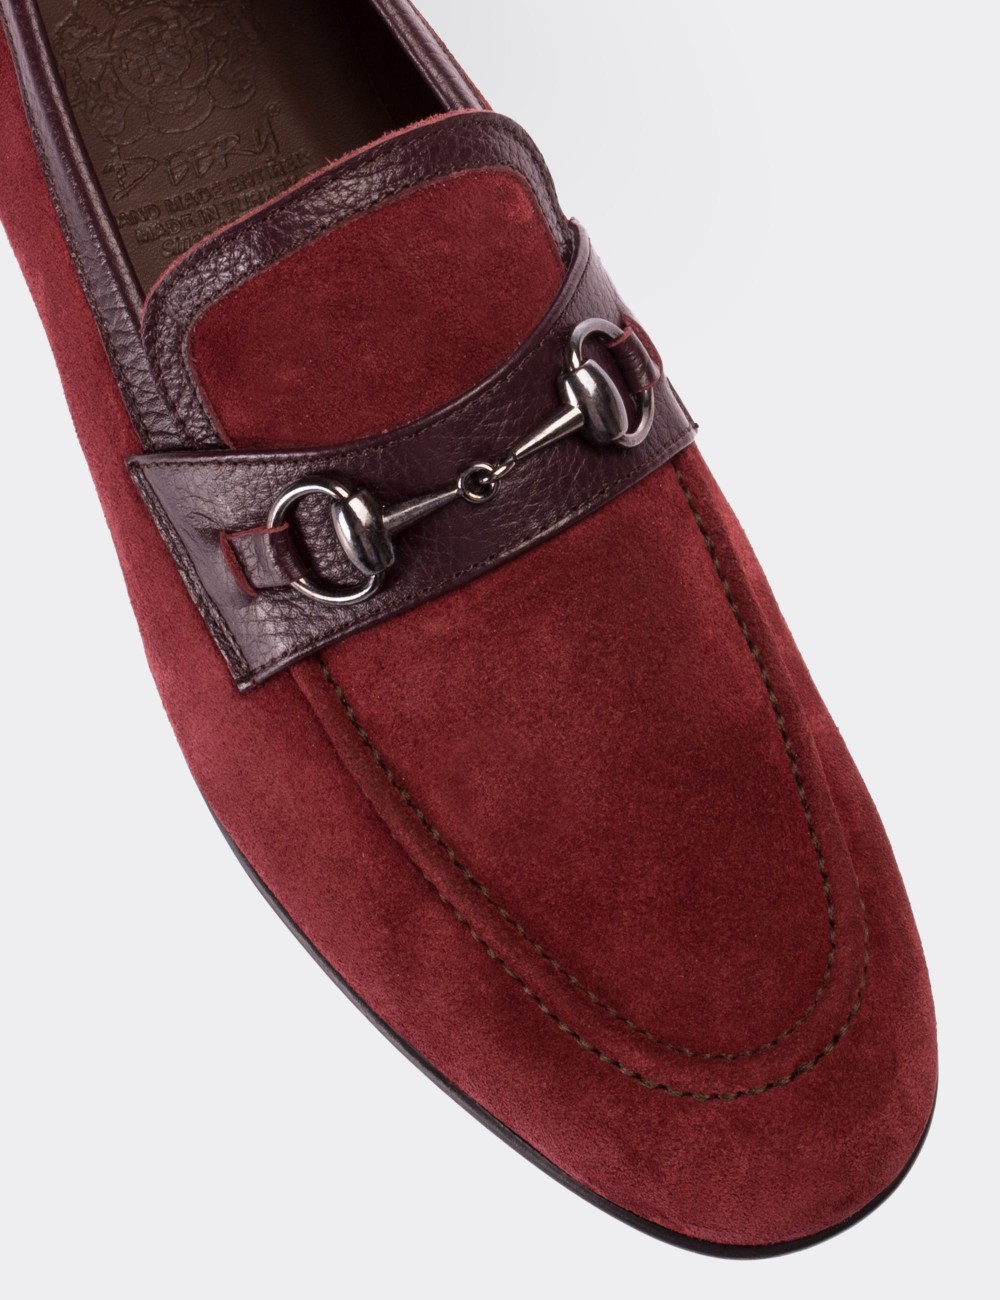 Burgundy Suede Leather Loafers - 01712MBRDC01